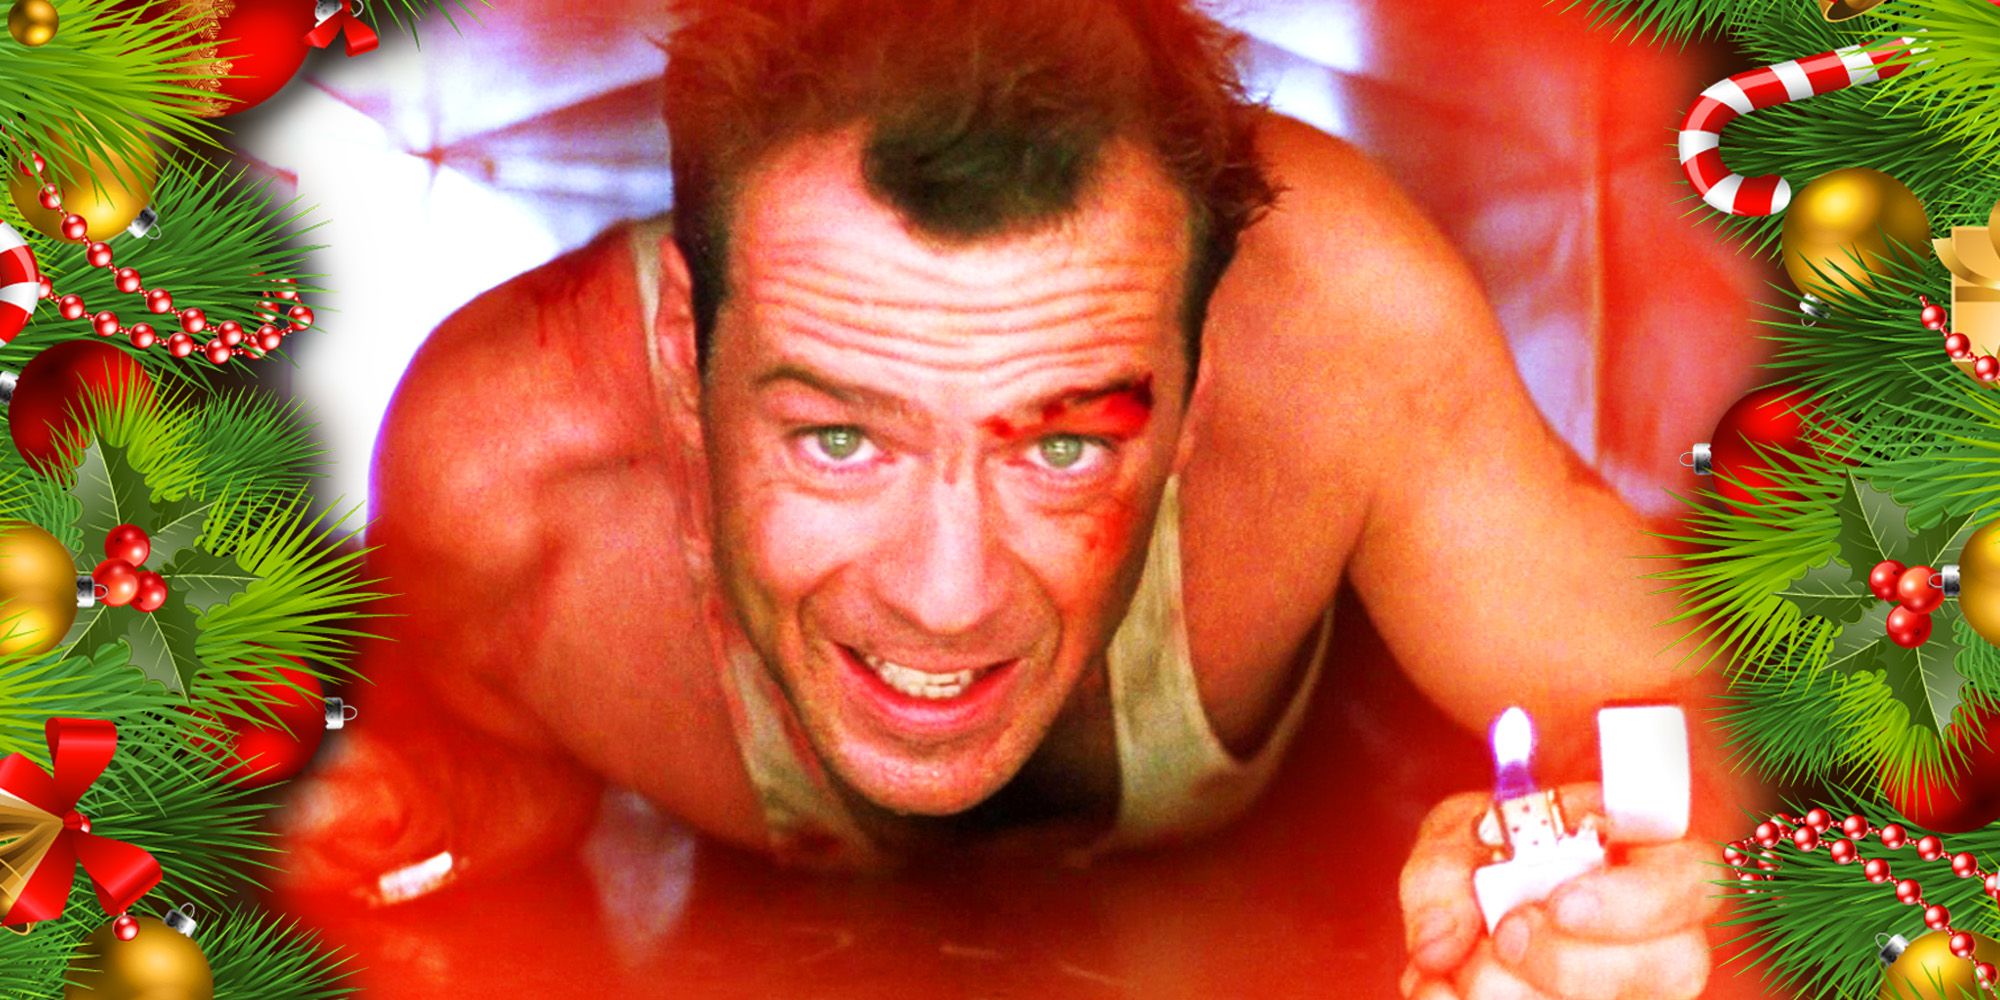 Bruce Willis as John McClane crawling in Die Hard with Christmas decorations